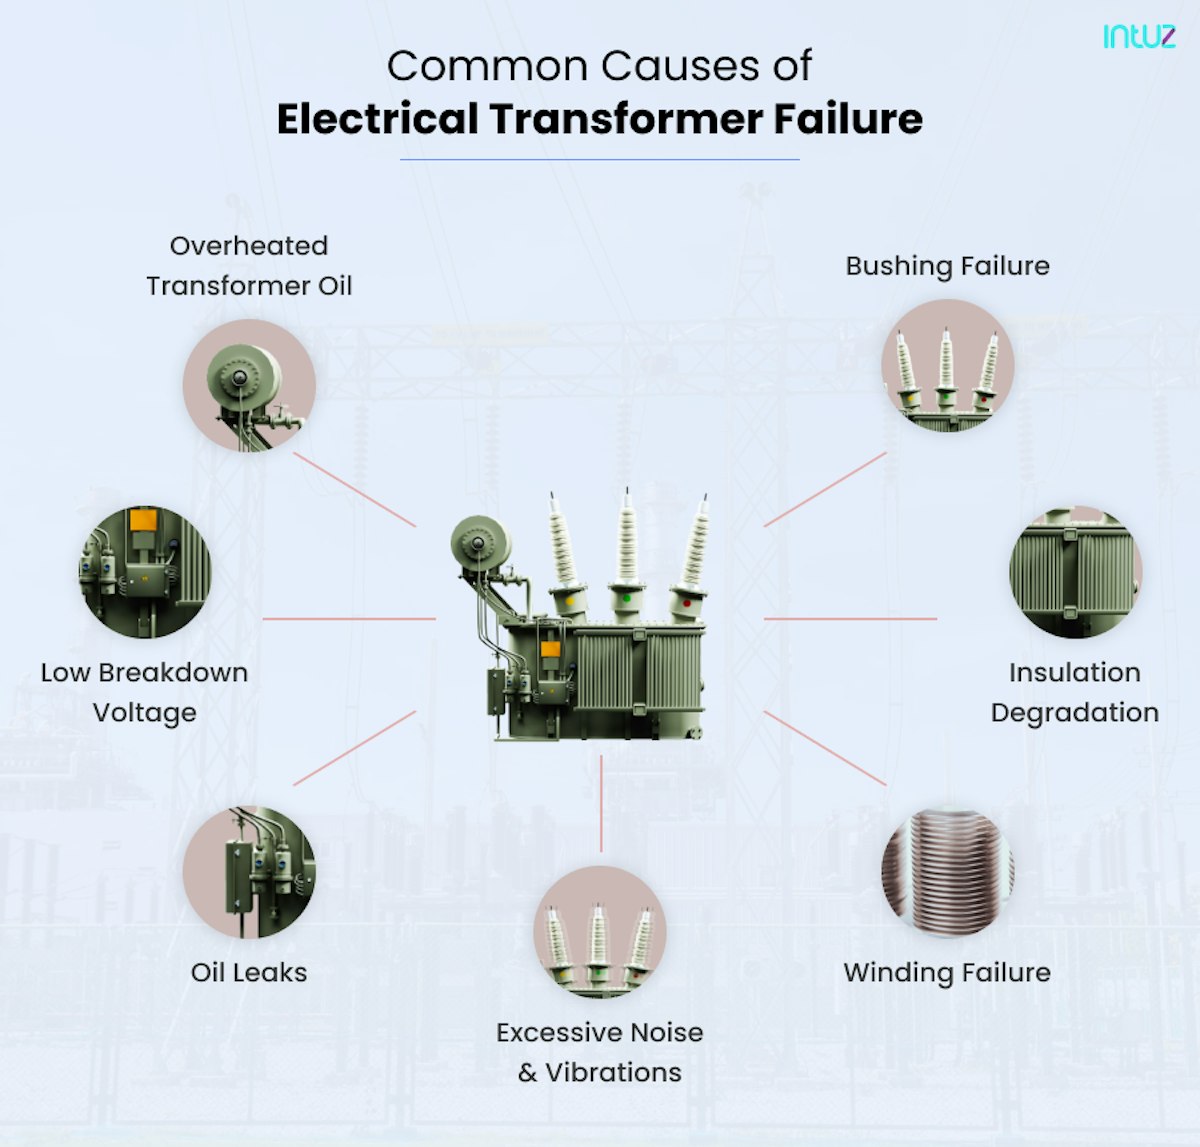 Common Causes of Electrical Transformer Failure